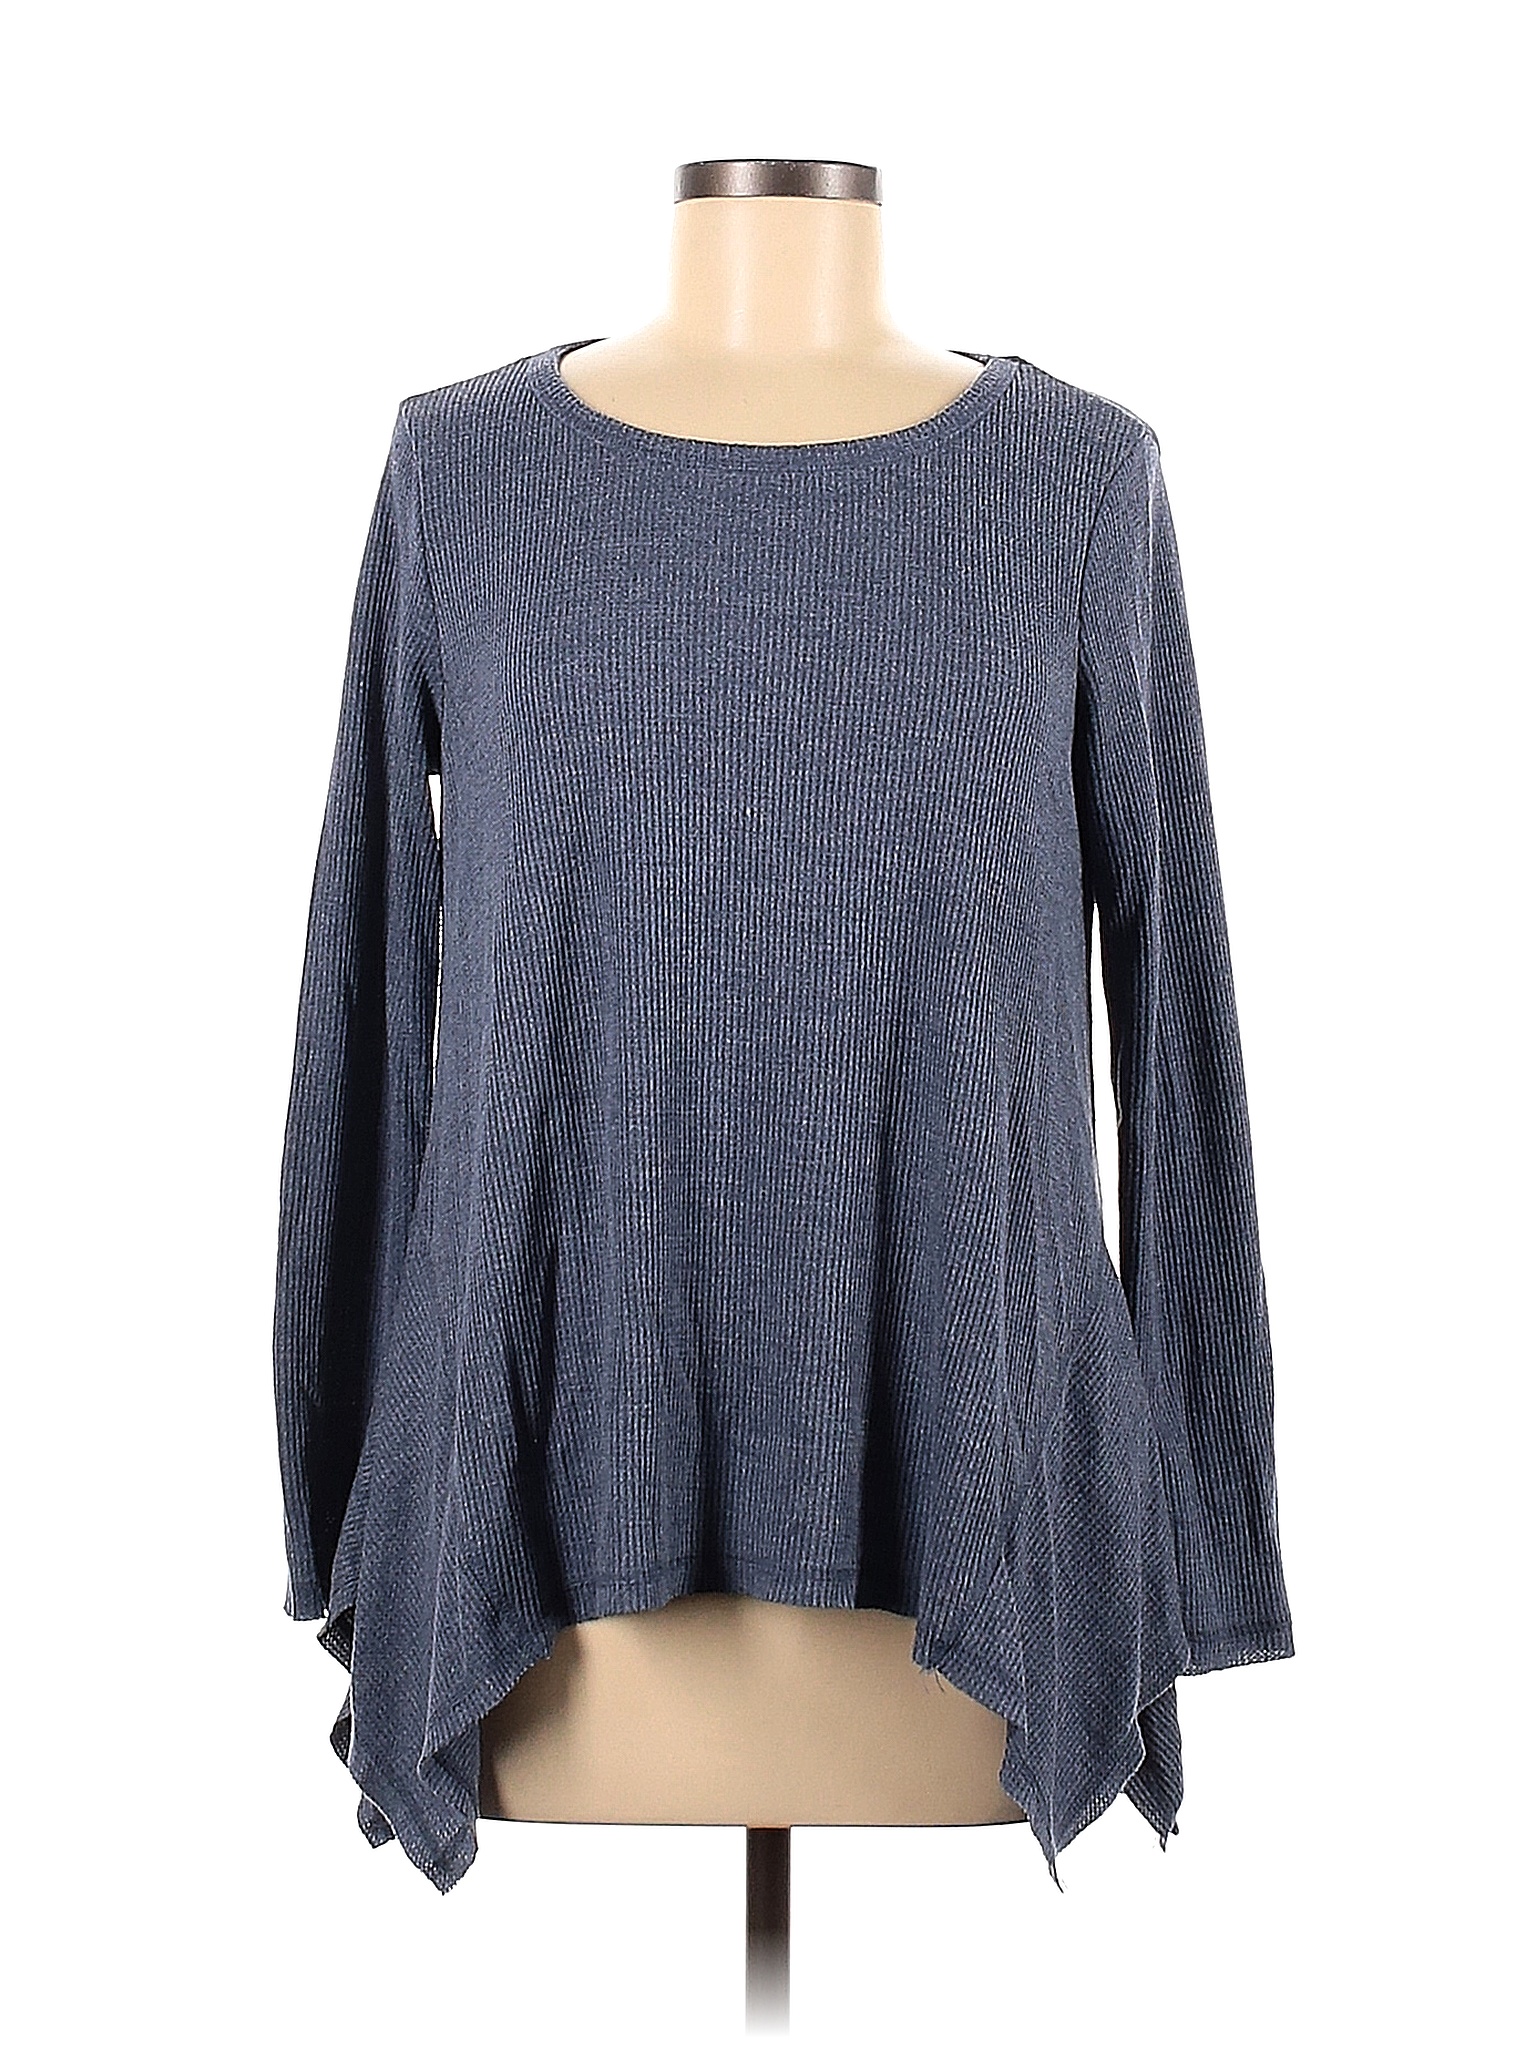 Jane and Delancey Solid Blue Long Sleeve Top Size M - 76% off | thredUP